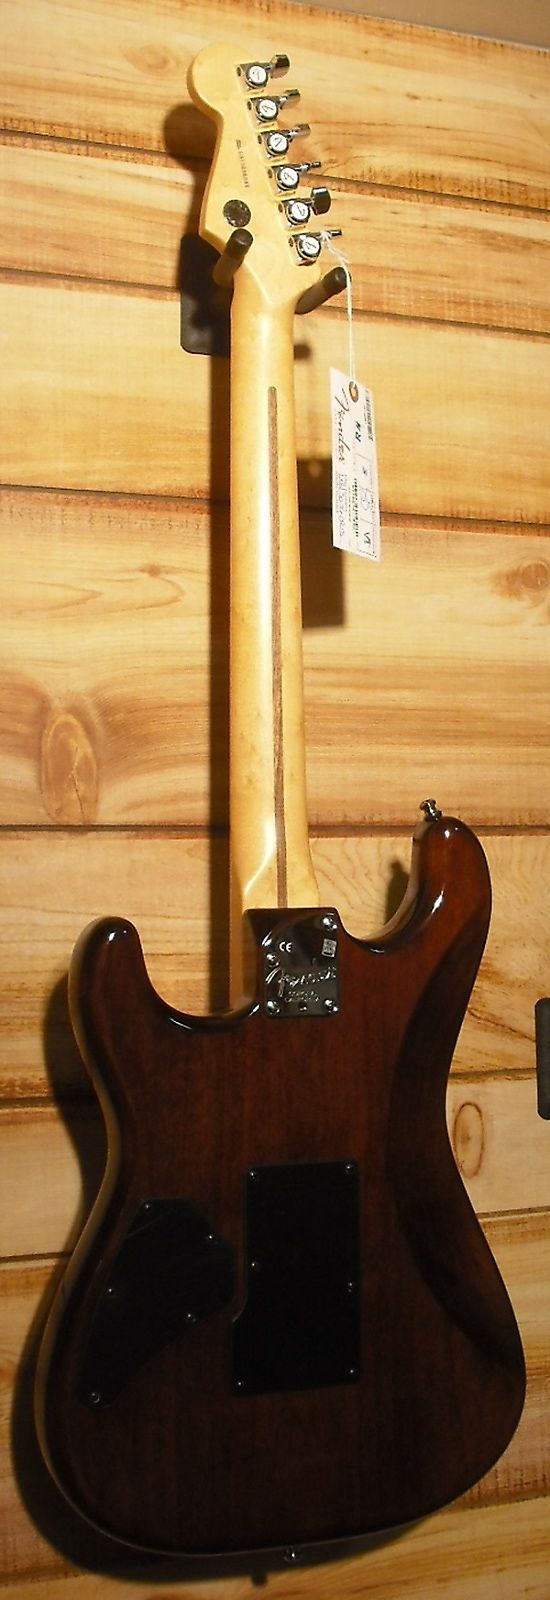 Limited Edition Fender Select Stratocaster Inlaid Pickguard Neck Plate